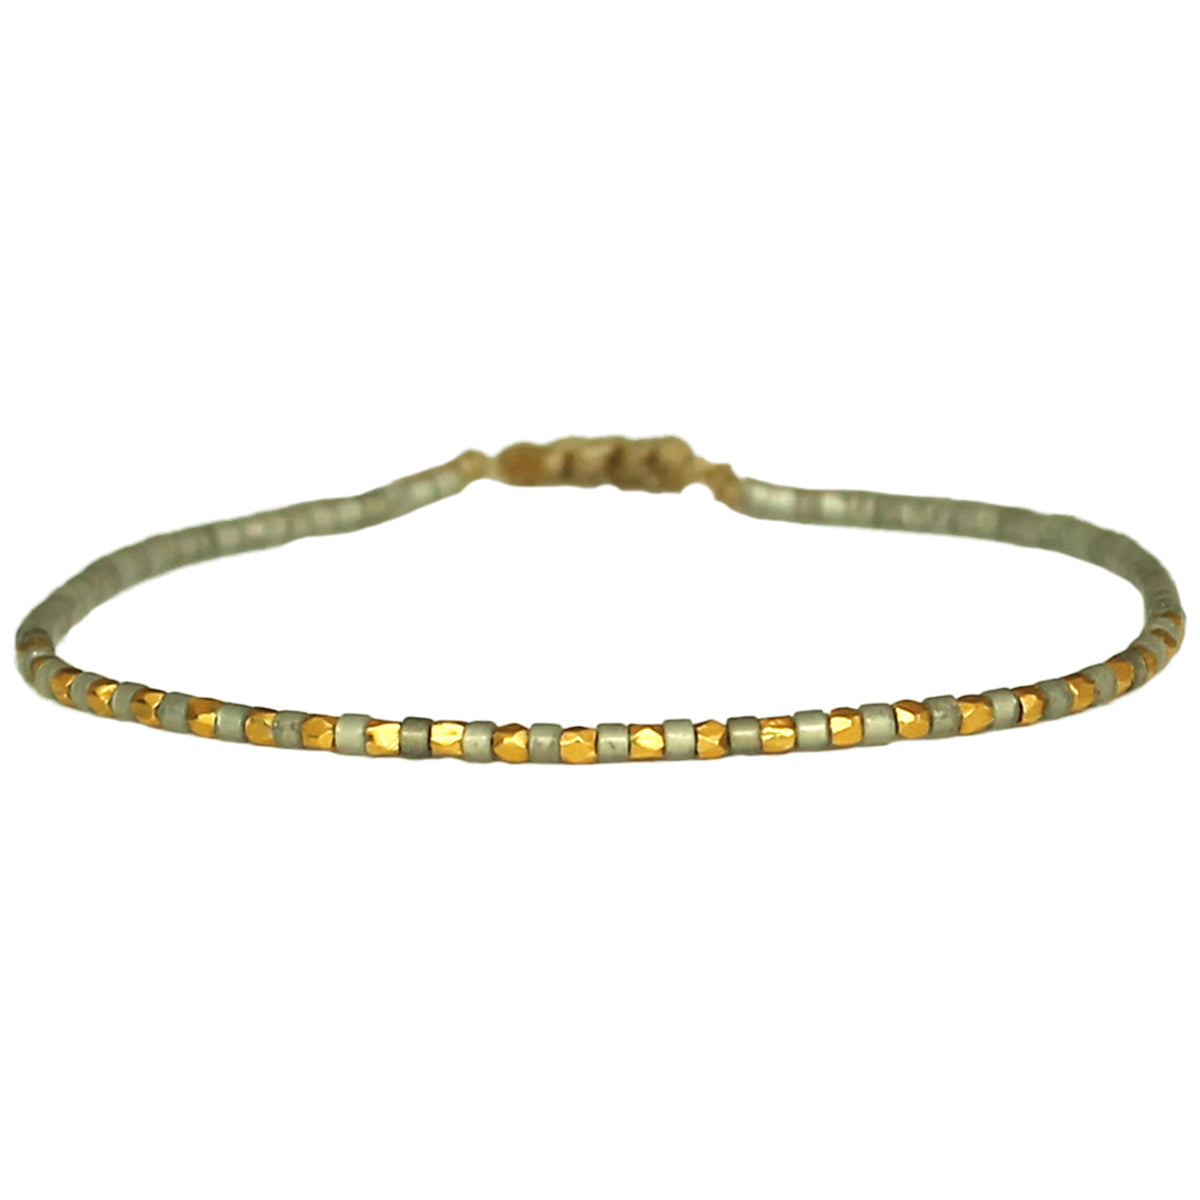 THIN BRACELET IN OYSTER GREY & GOLD